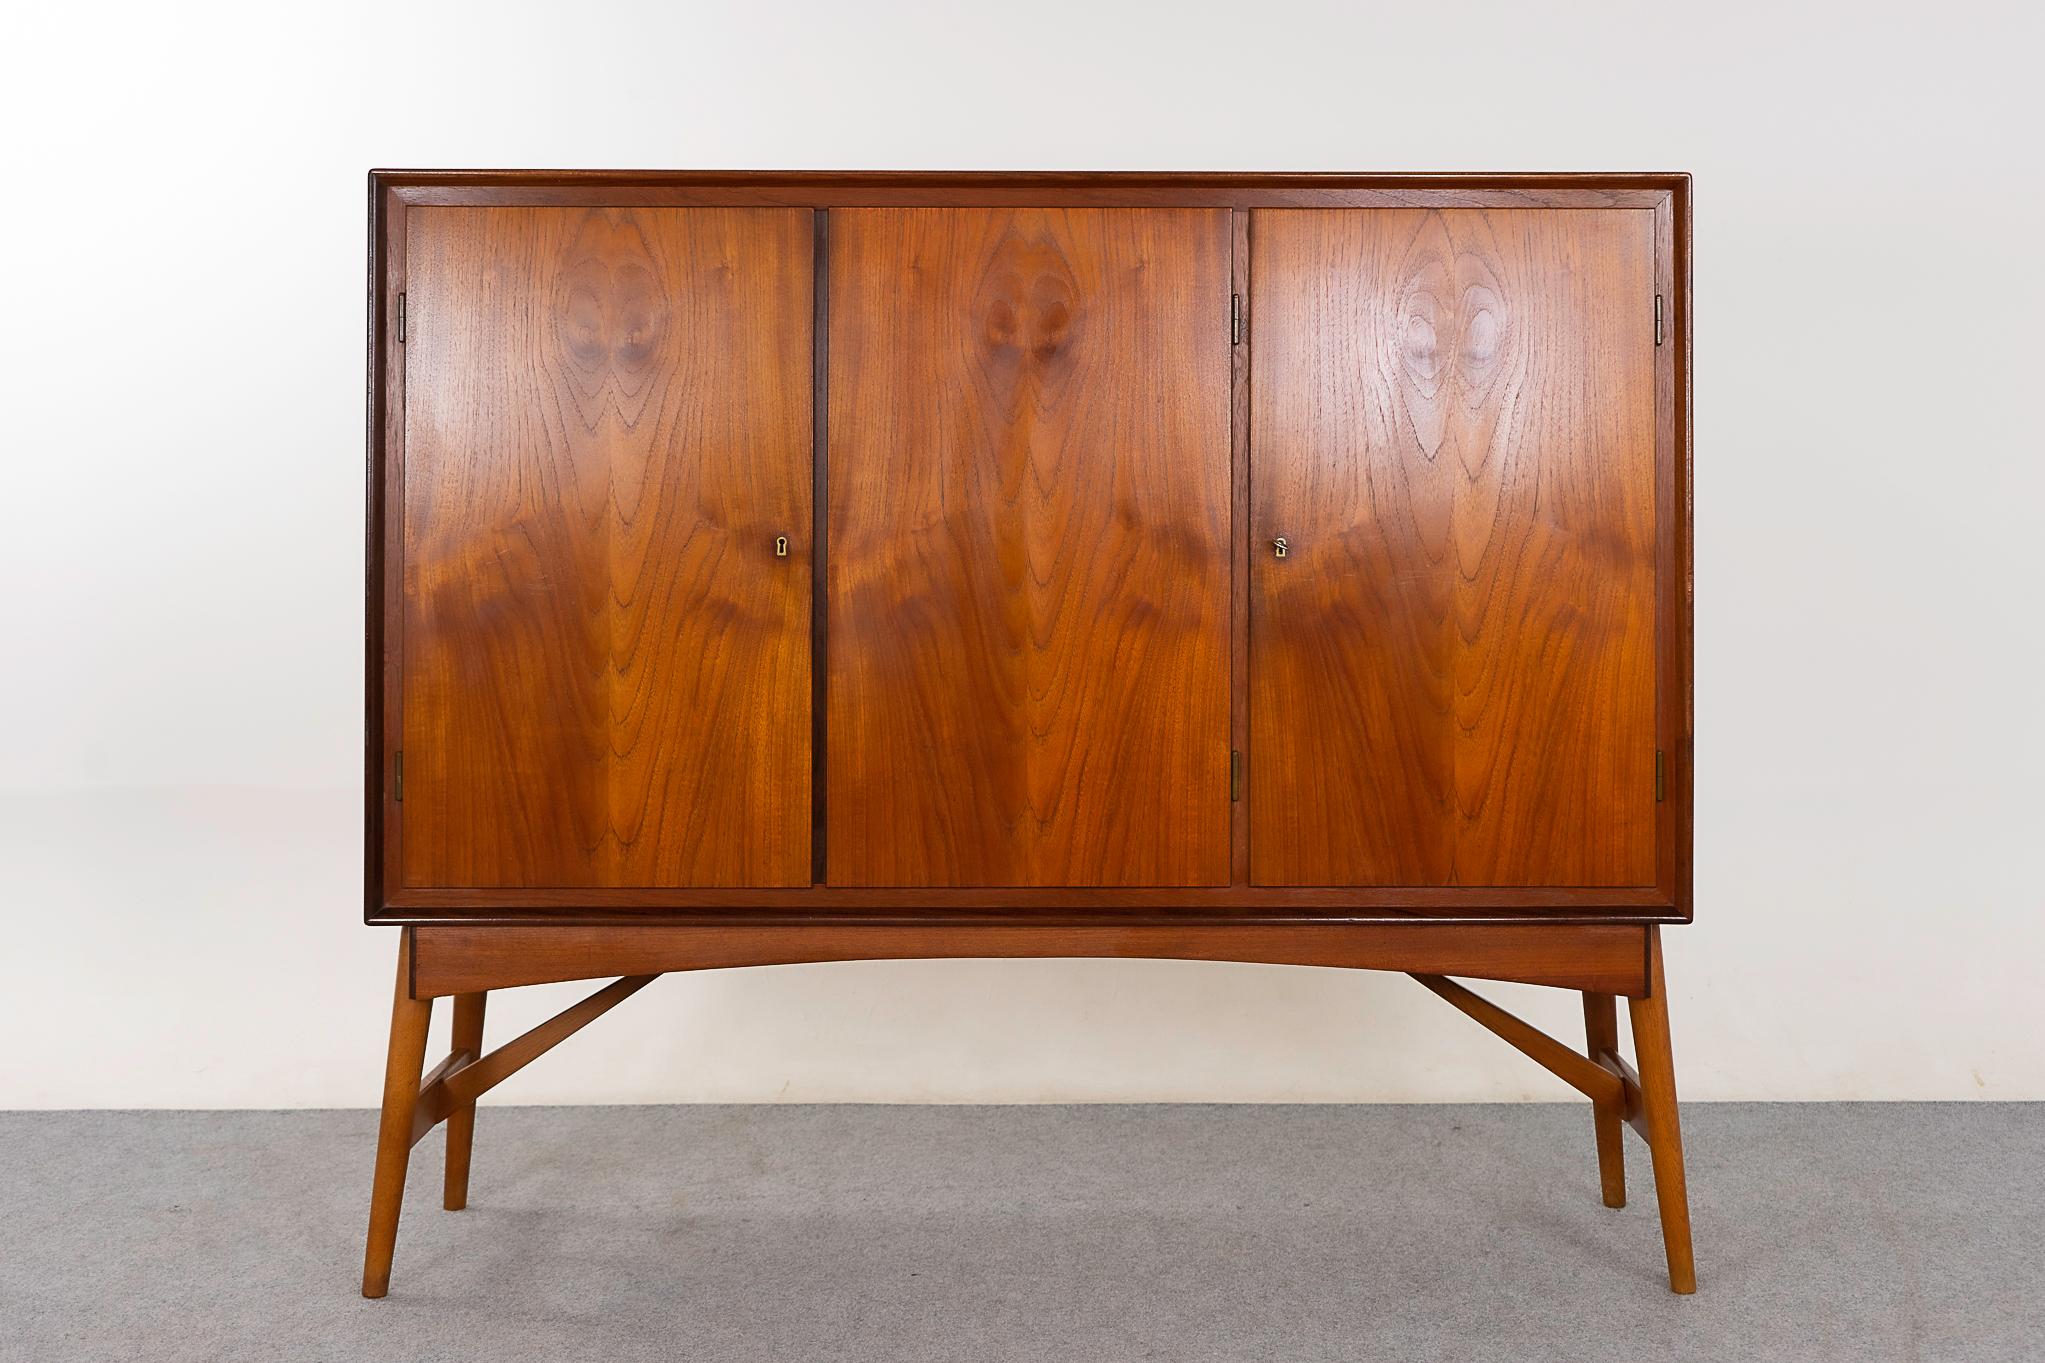 Teak & oak Danish sideboard, circa 1960's. Stunning veneer and the top and door faces. Sculptural angled oak base contrasts beautifully with the warm tone of the top. Behind the lockable doors, adjustable shelving and a darling set of sleek drawers